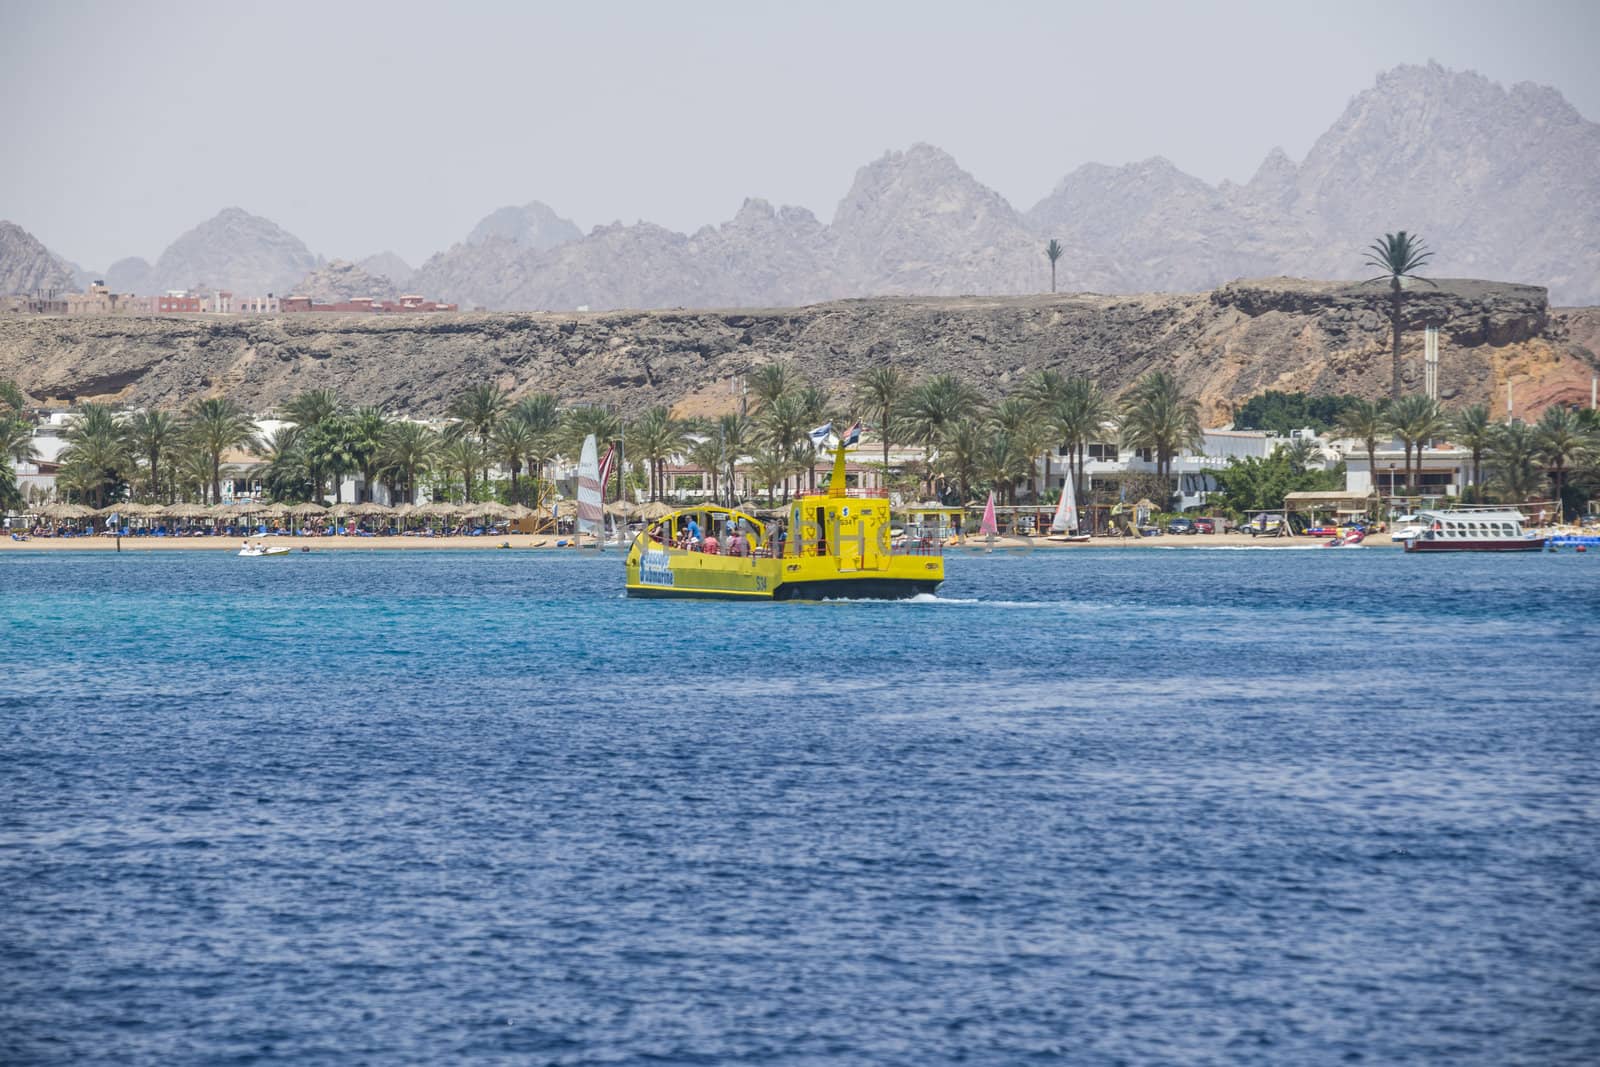 Boats that sail over the coral reefs in the bay of Sharm el Sheikh, Egypt. The picture is shot one day in April 2013.